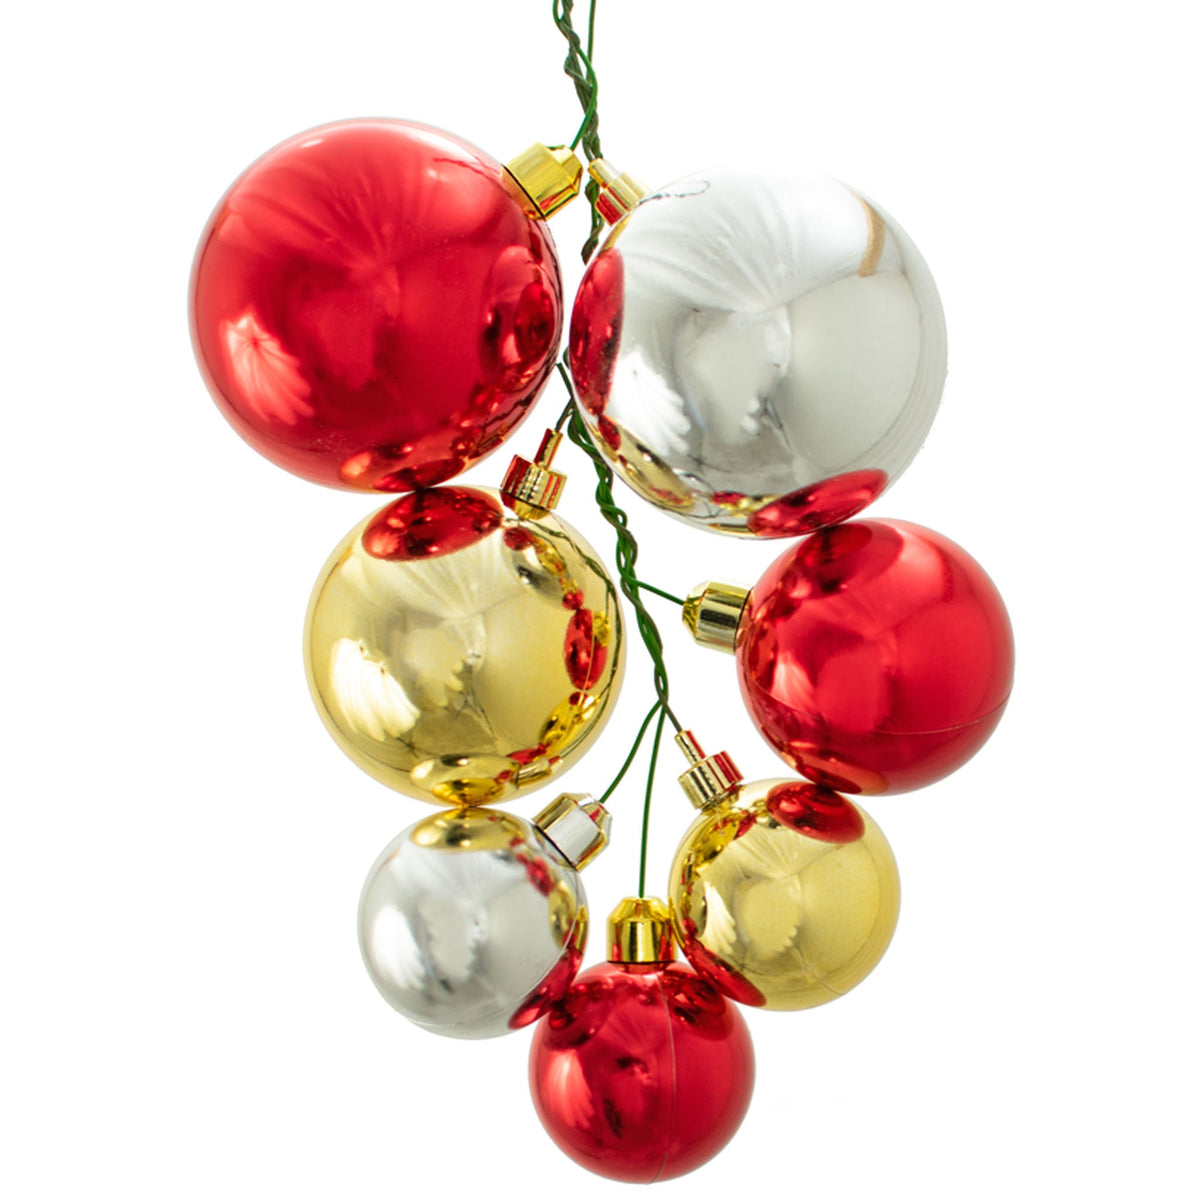 Shop at leedisplay.com for your Christmas Tree Ball Ornament Clusters now.  Each order comes with 6 pieces